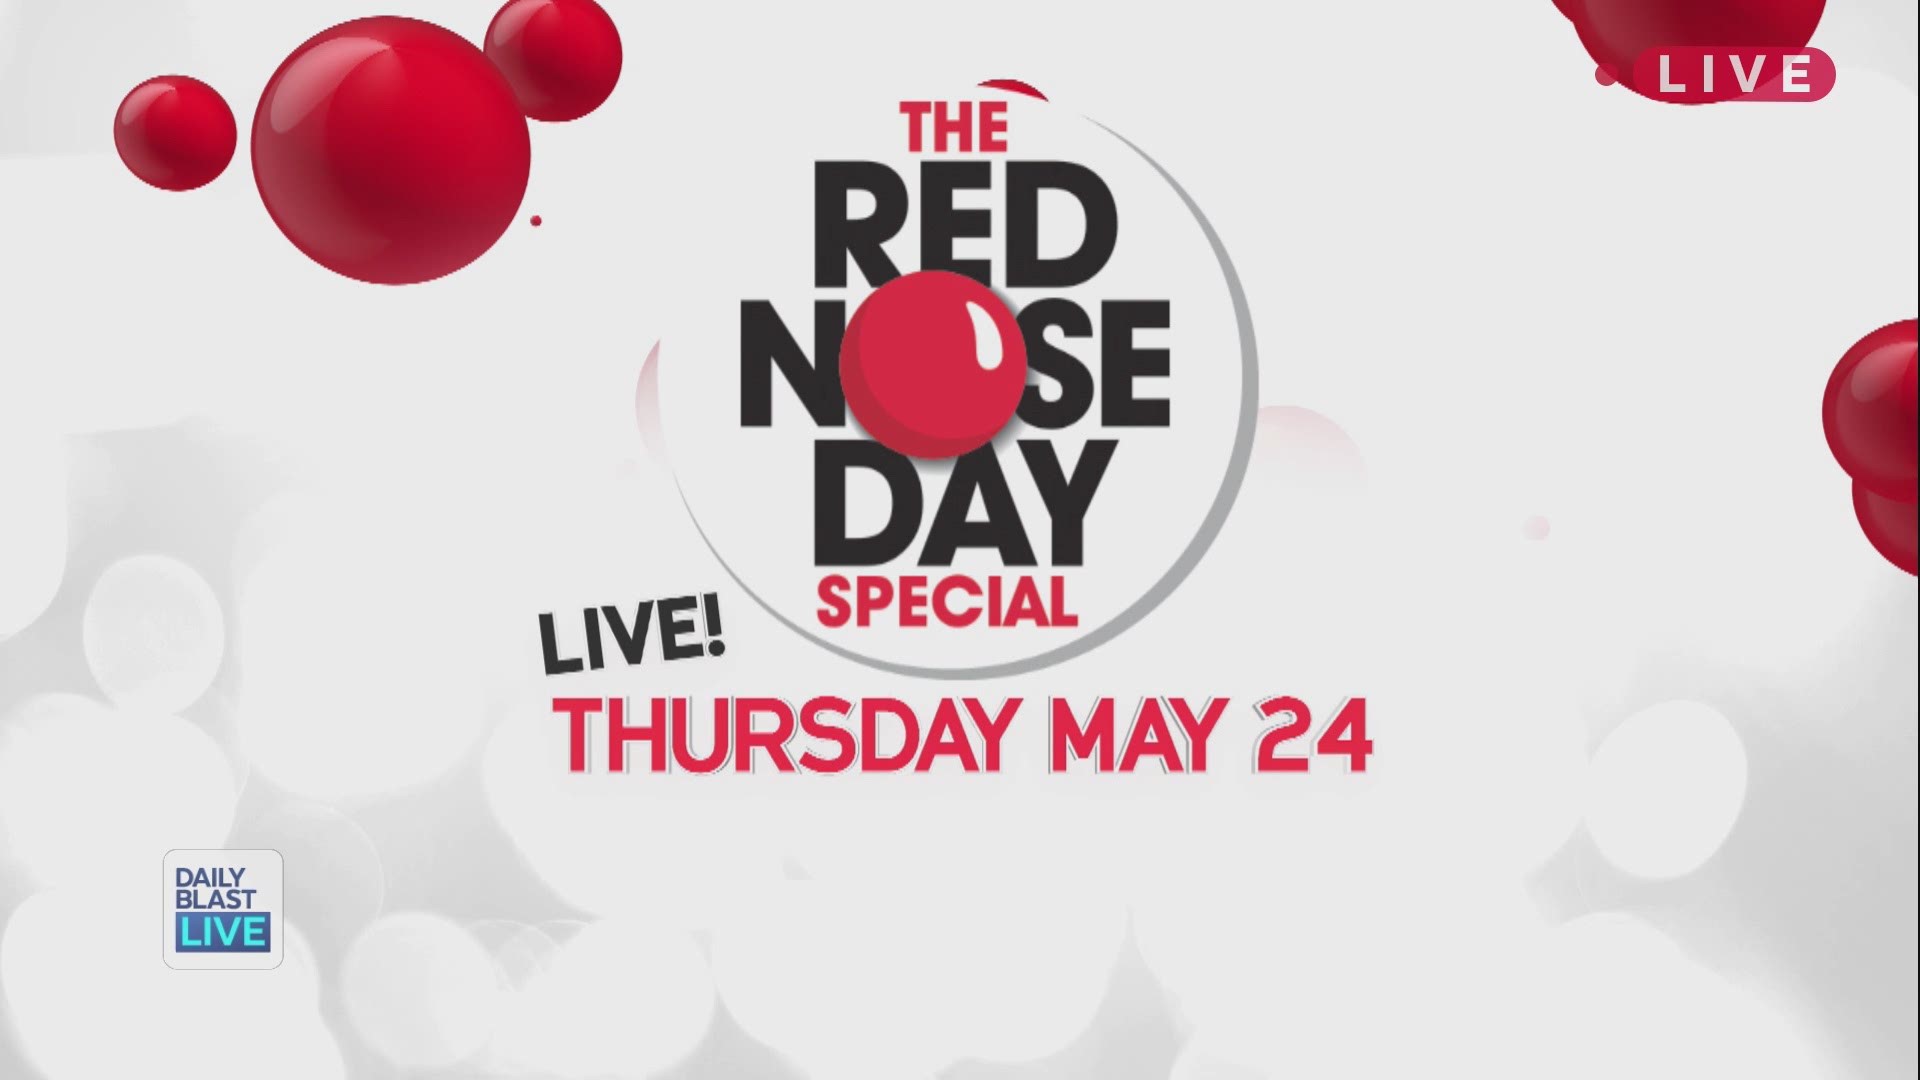 You may know him as the host of "Talking Dead" on AMC, but tonight he's giving back through some laughs! Hardwick is hosting "The Red Nose Day Special" on NBC that aims to raise money for children living in poverty. Daily Blast LIVE co-host and fellow com